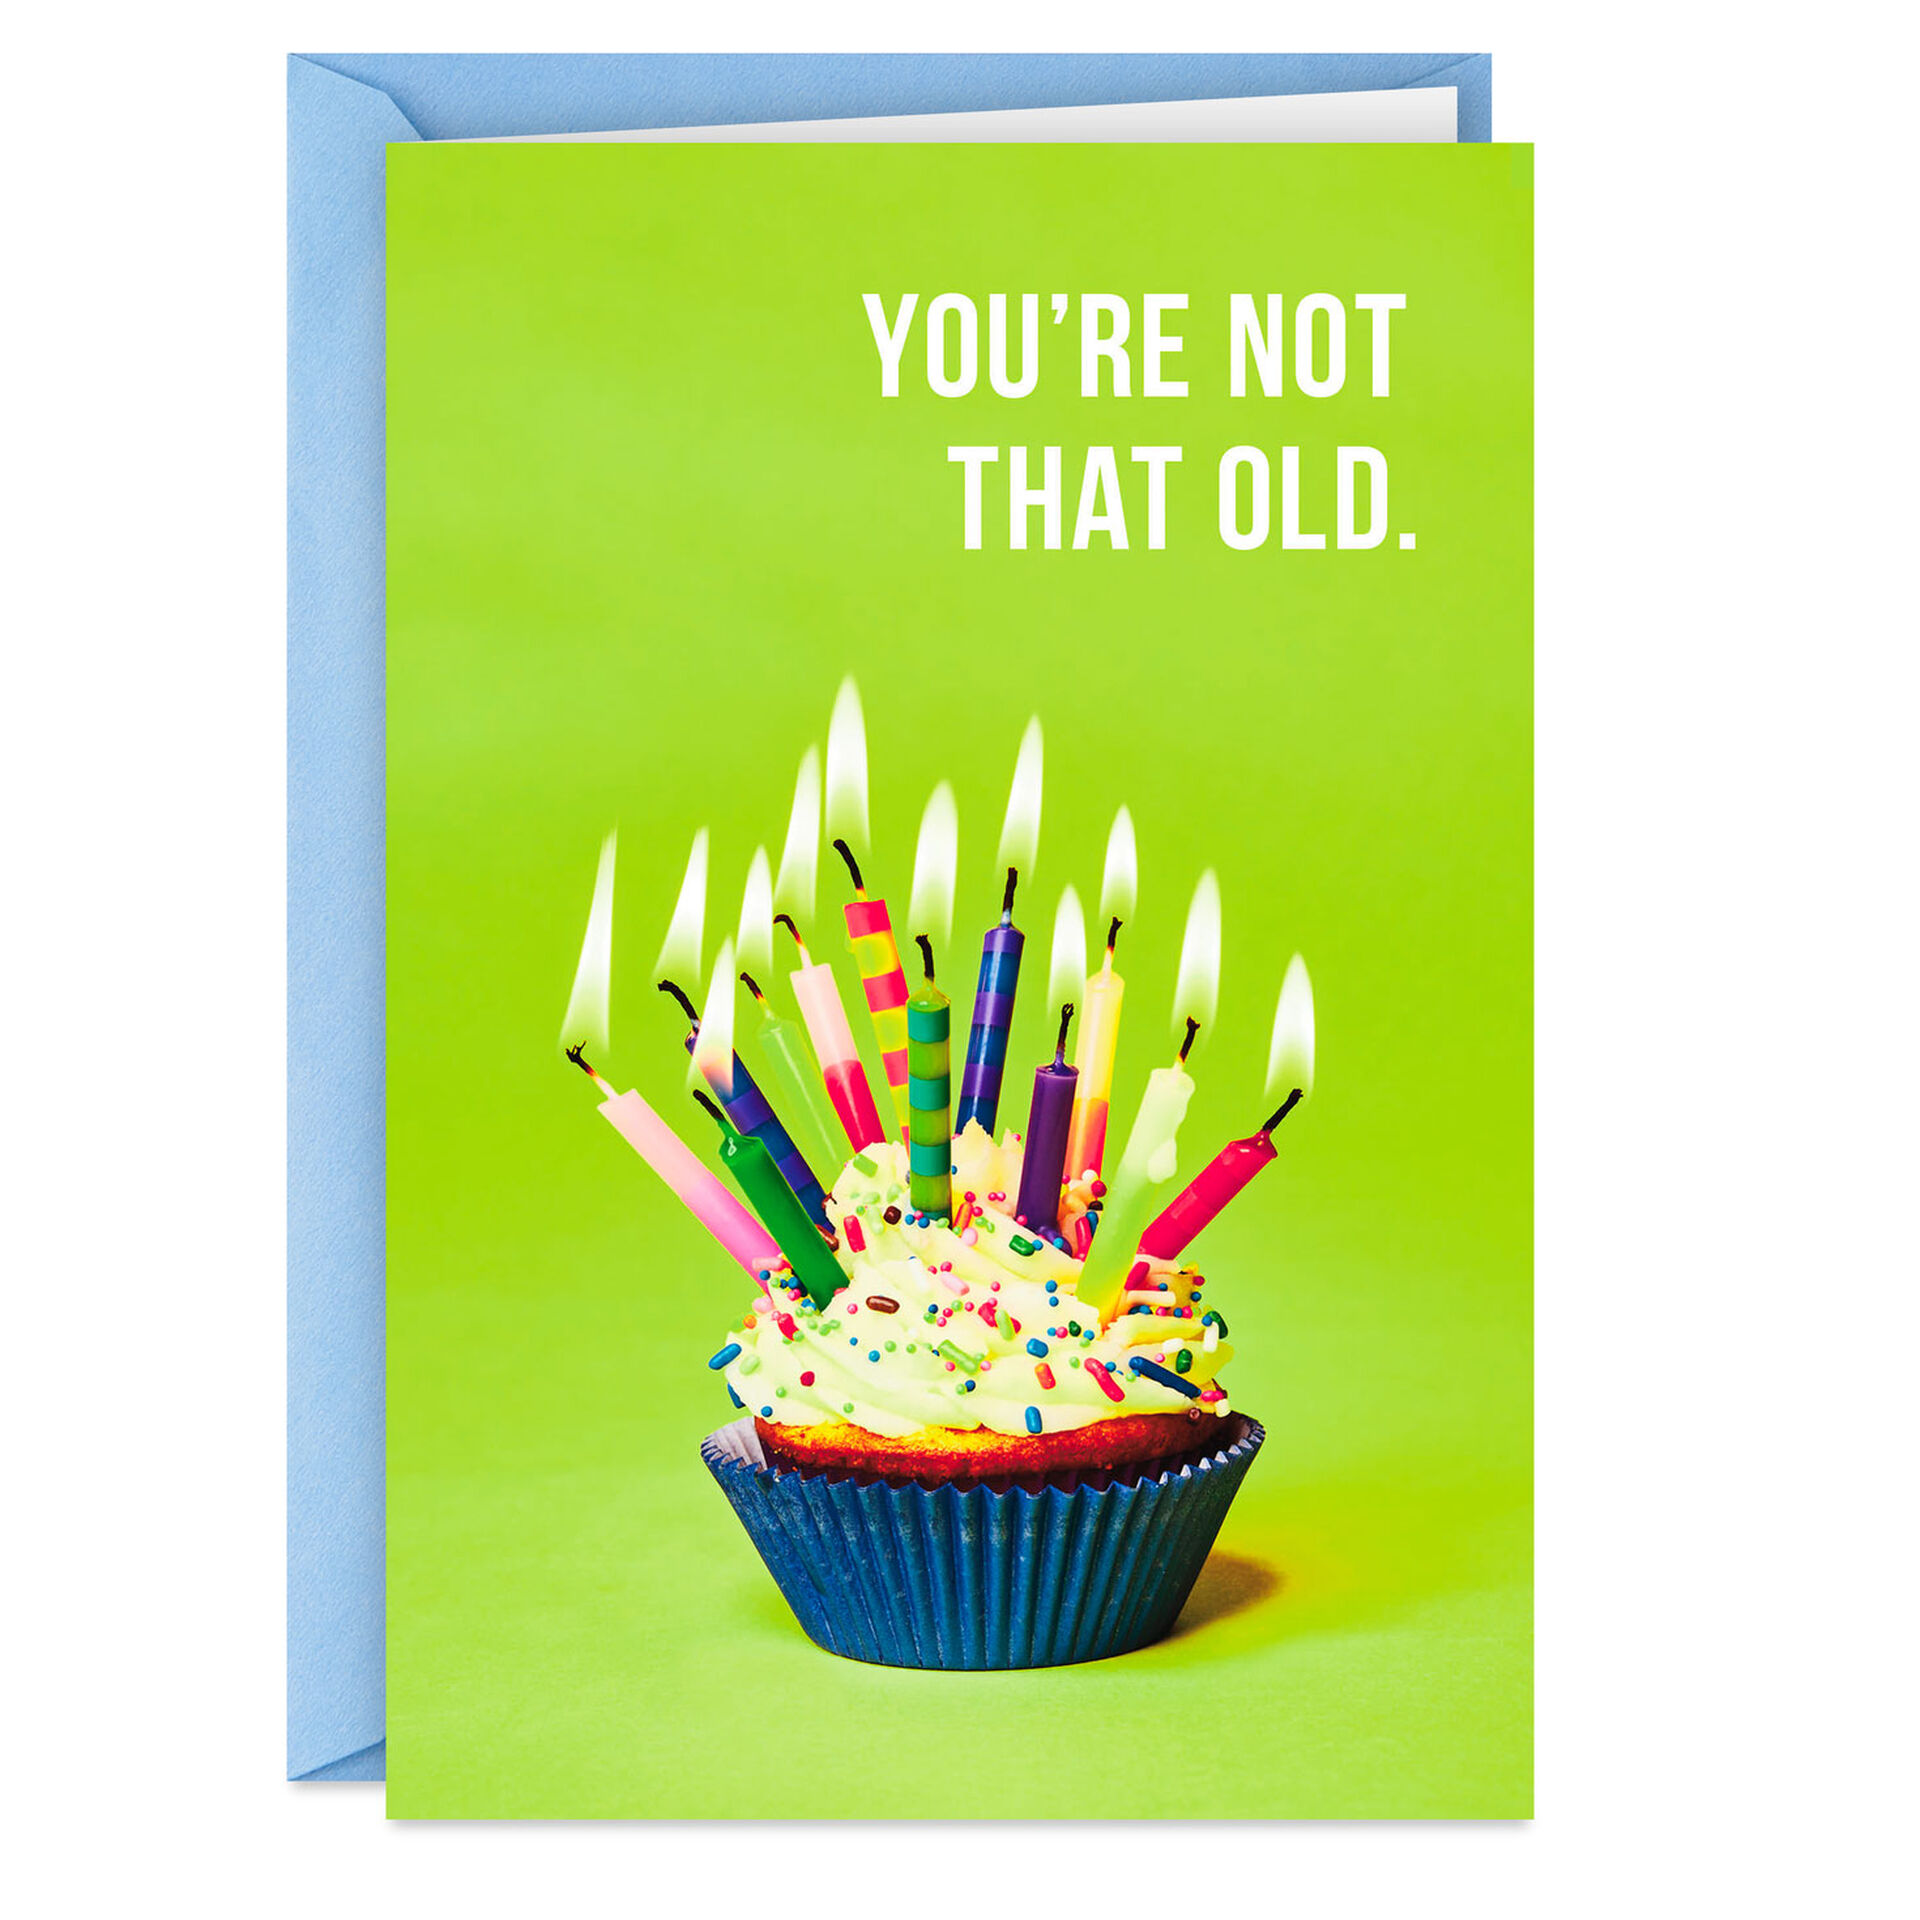 Cupcake-Stuffed-With-Candles-Birthday-Card_369ZZB4047_01